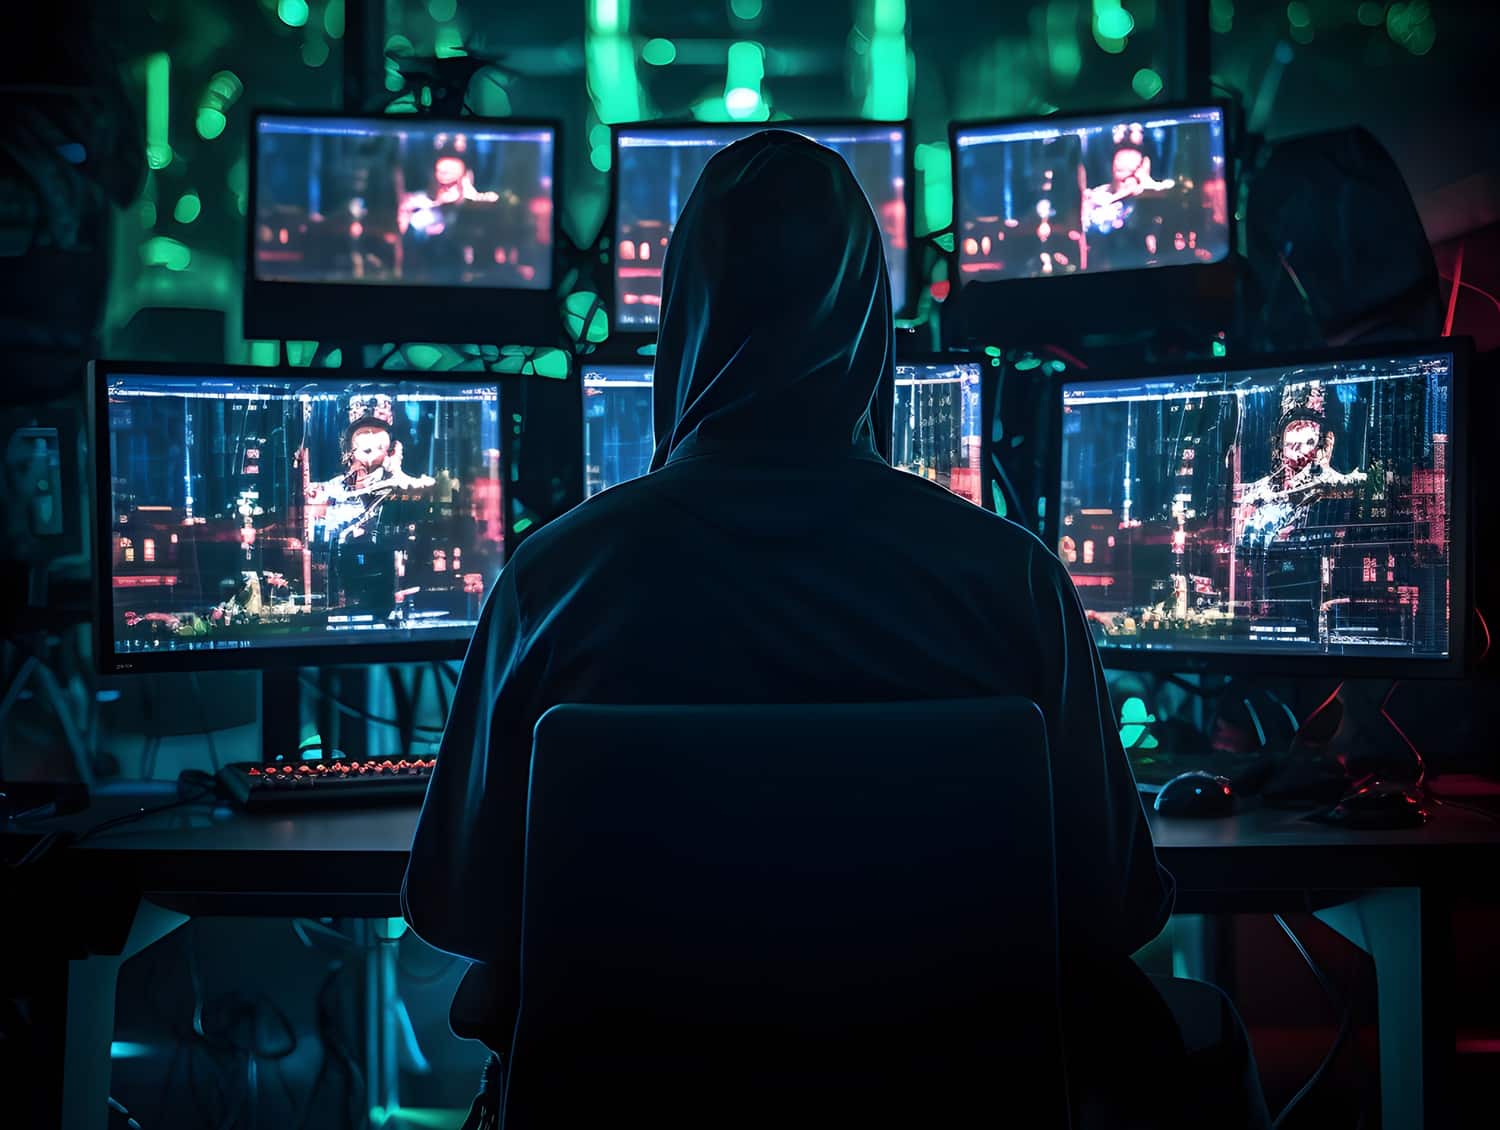 A hooded person sits in a dark room in front of several computer monitors.